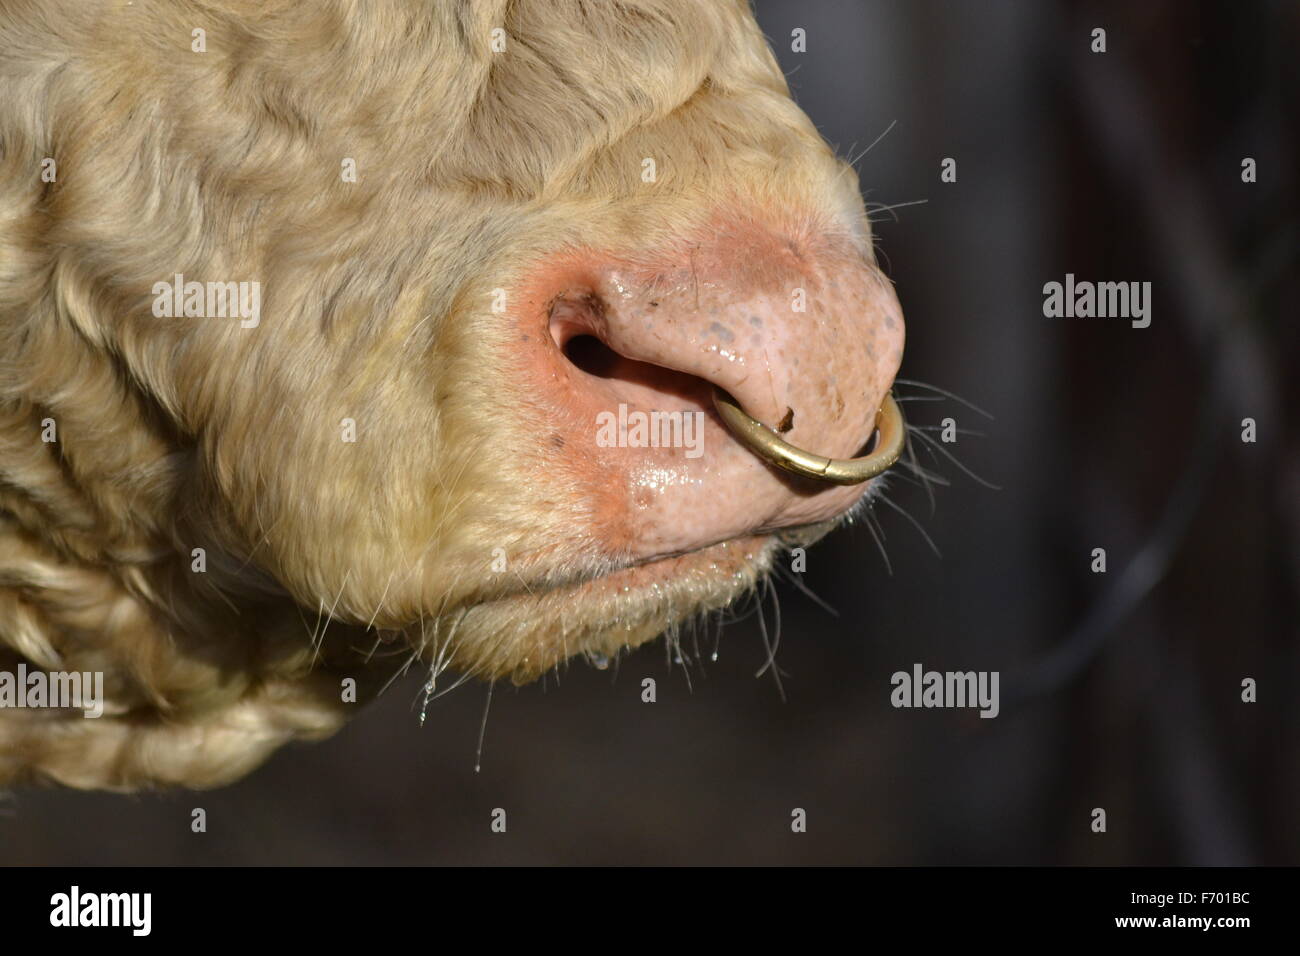 close up of bull with ring in nose Stock Photo